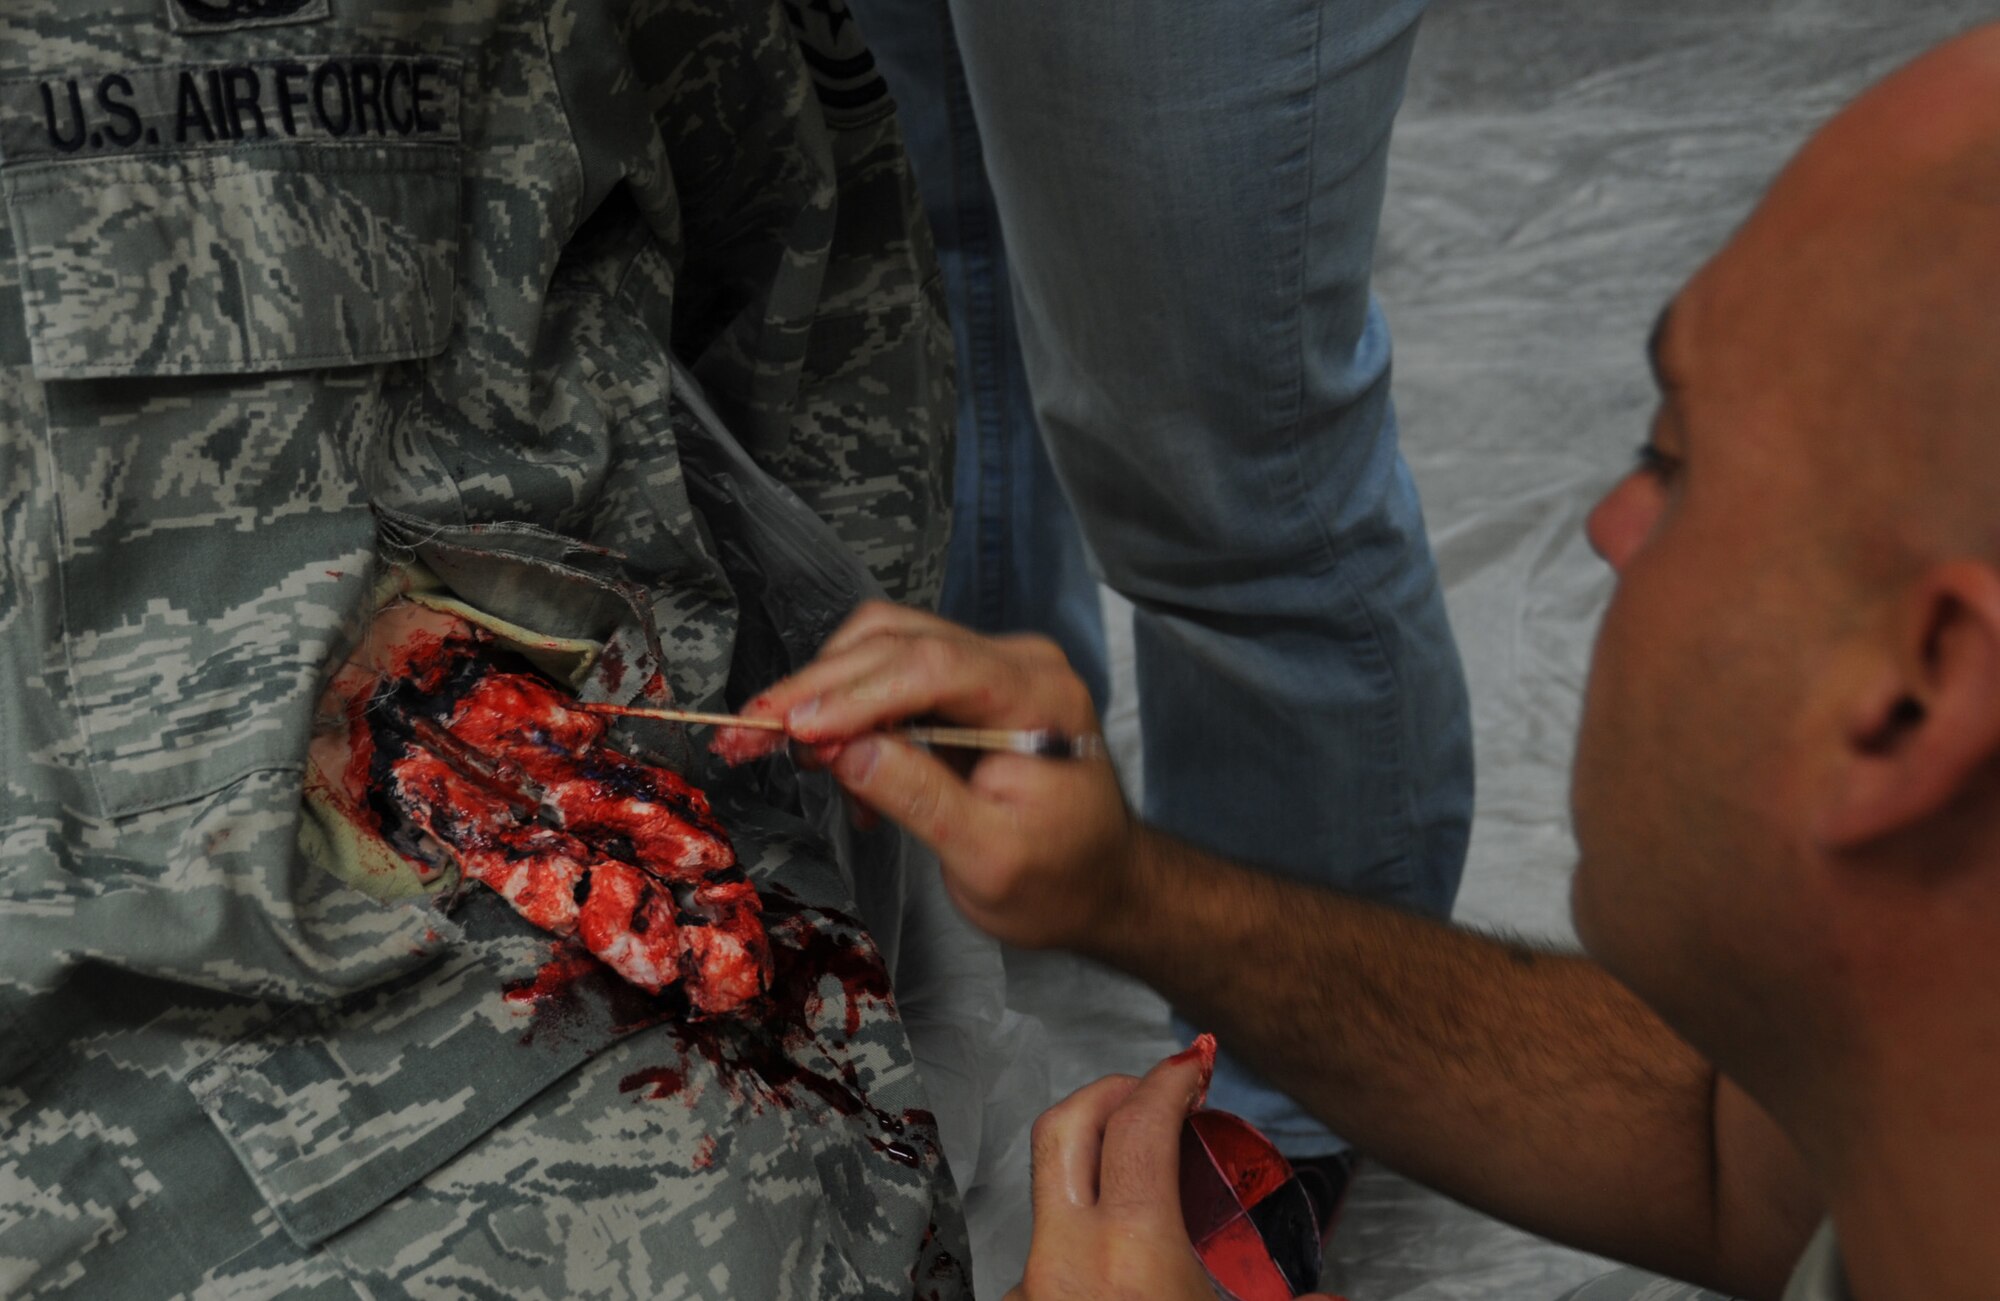 U.S. Air Force Master Sgt. Perry Foster, 366th Fighter Wing executive plans and programs medical liaison, paints cotton balls to simulate an open wound for a Major Accident Response Exercise July 25, 2013, at Mountain Home Air Force Base, Idaho. Multiple base personnel and agencies participated in the MARE during the day. (U.S. Air Force photo by Senior Airman Benjamin Sutton/Released)